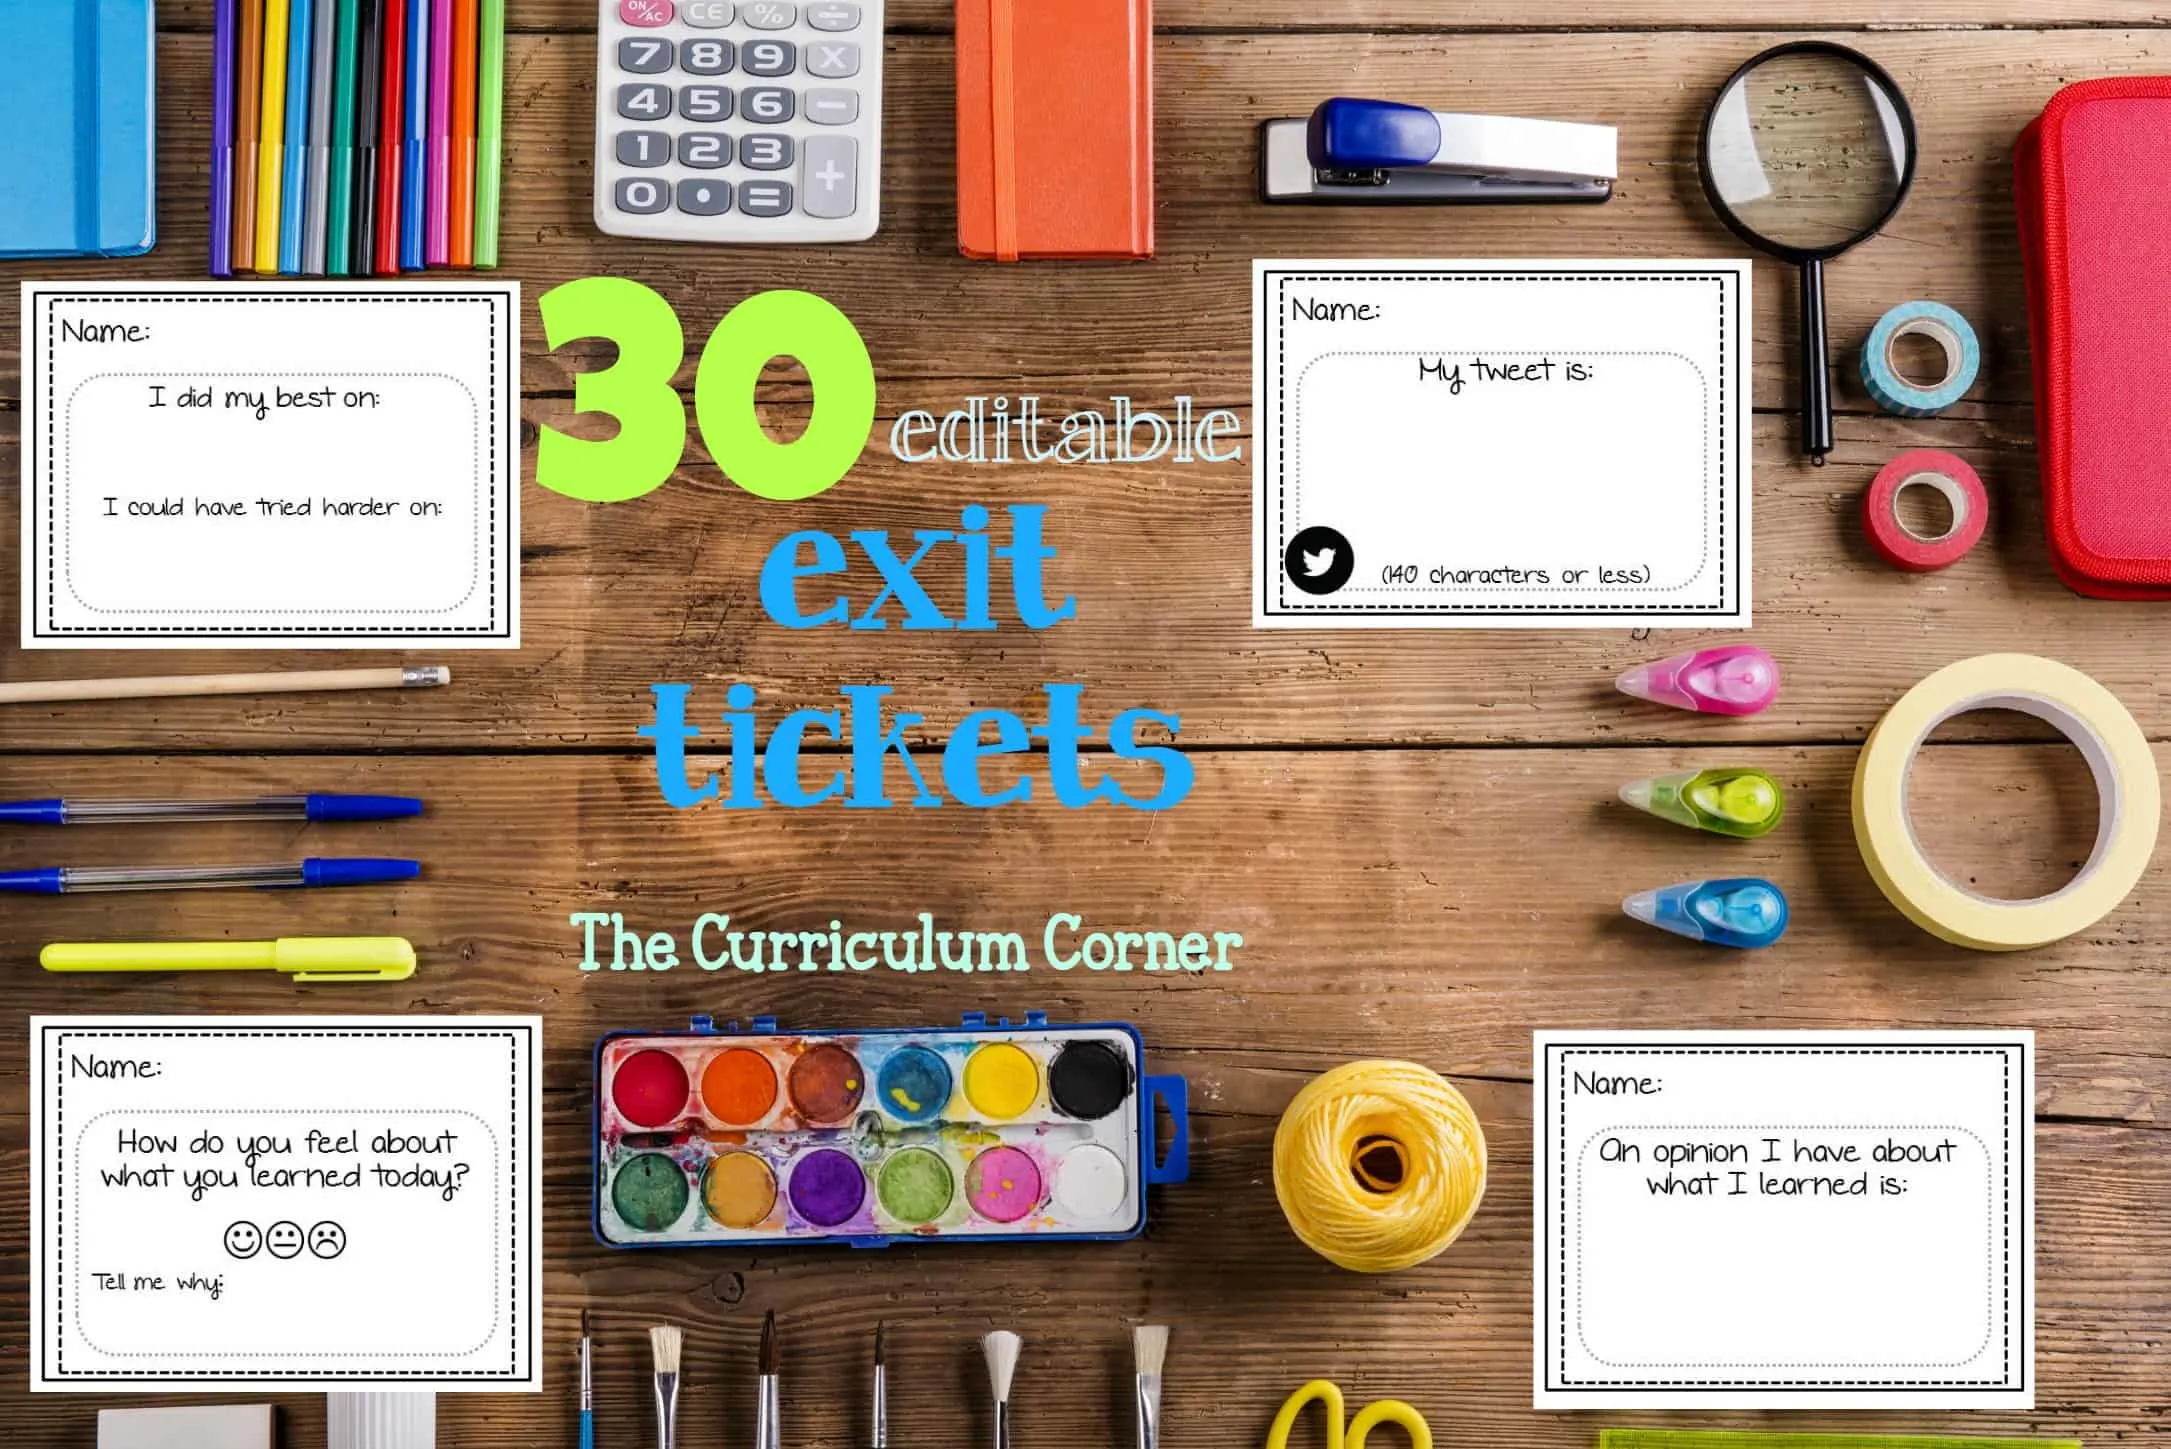 30 Editable Exit Tickets from The Curriculum Corner